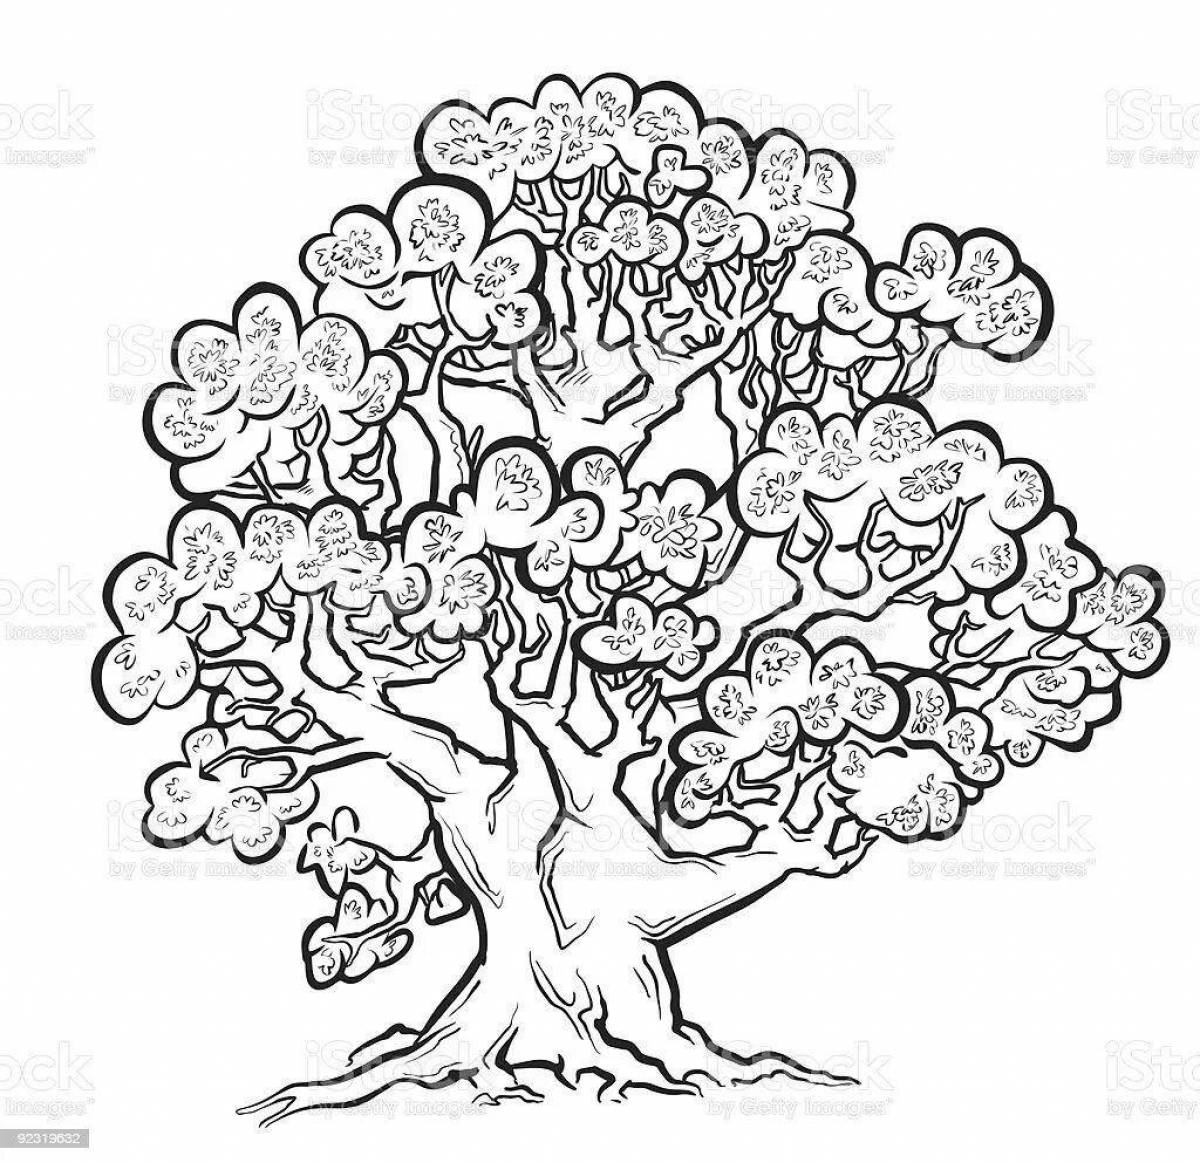 Playful coloring tree pages